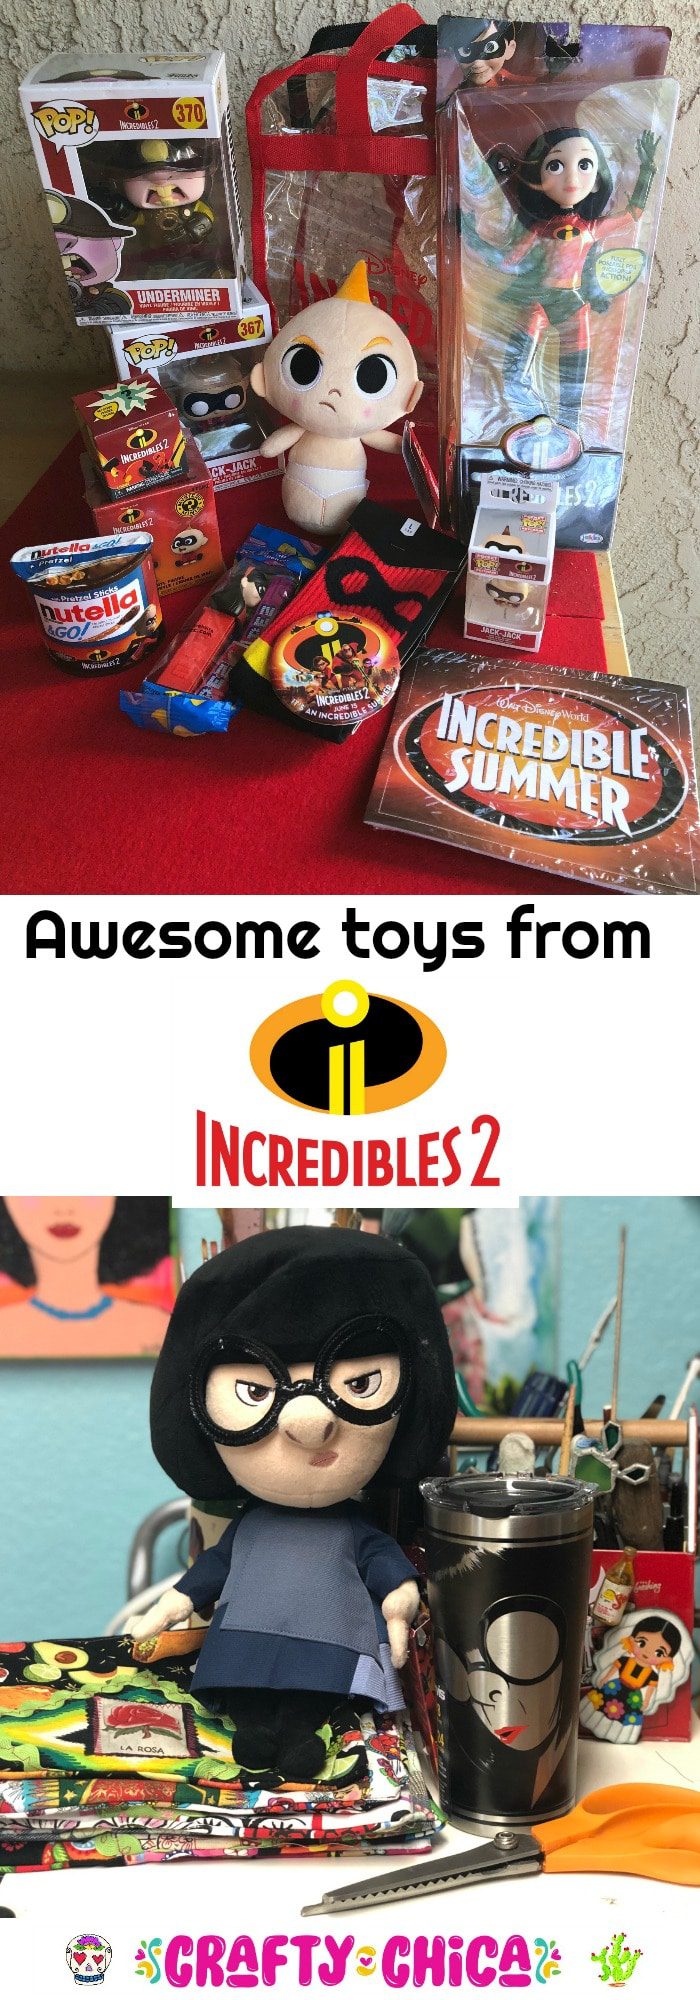 Incredibles 2 shopping guide - Crafty Chica